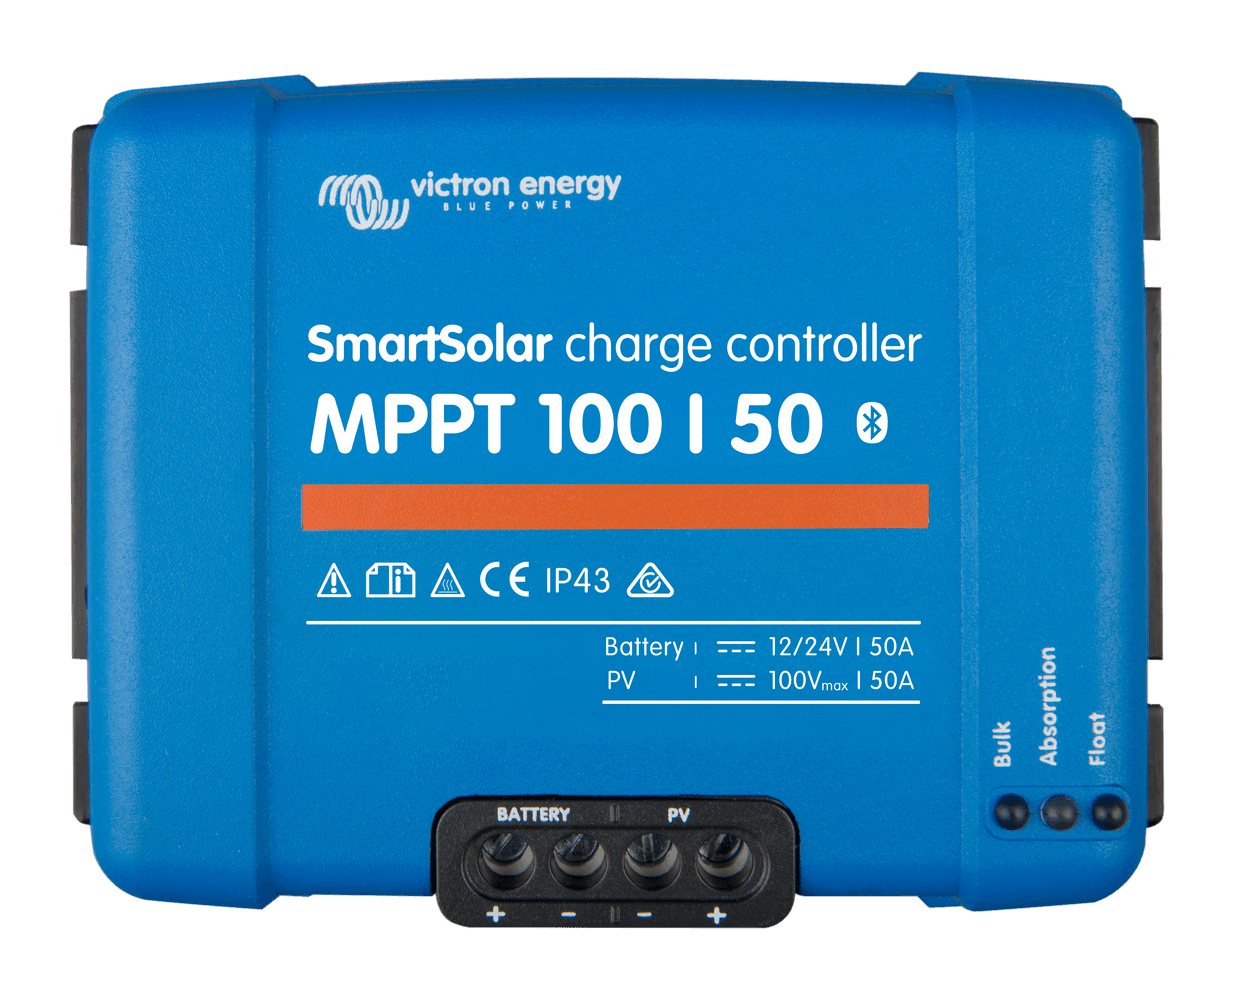 Victron Smart Solar MPPT Charge Controller 100/50 With Bluetooth